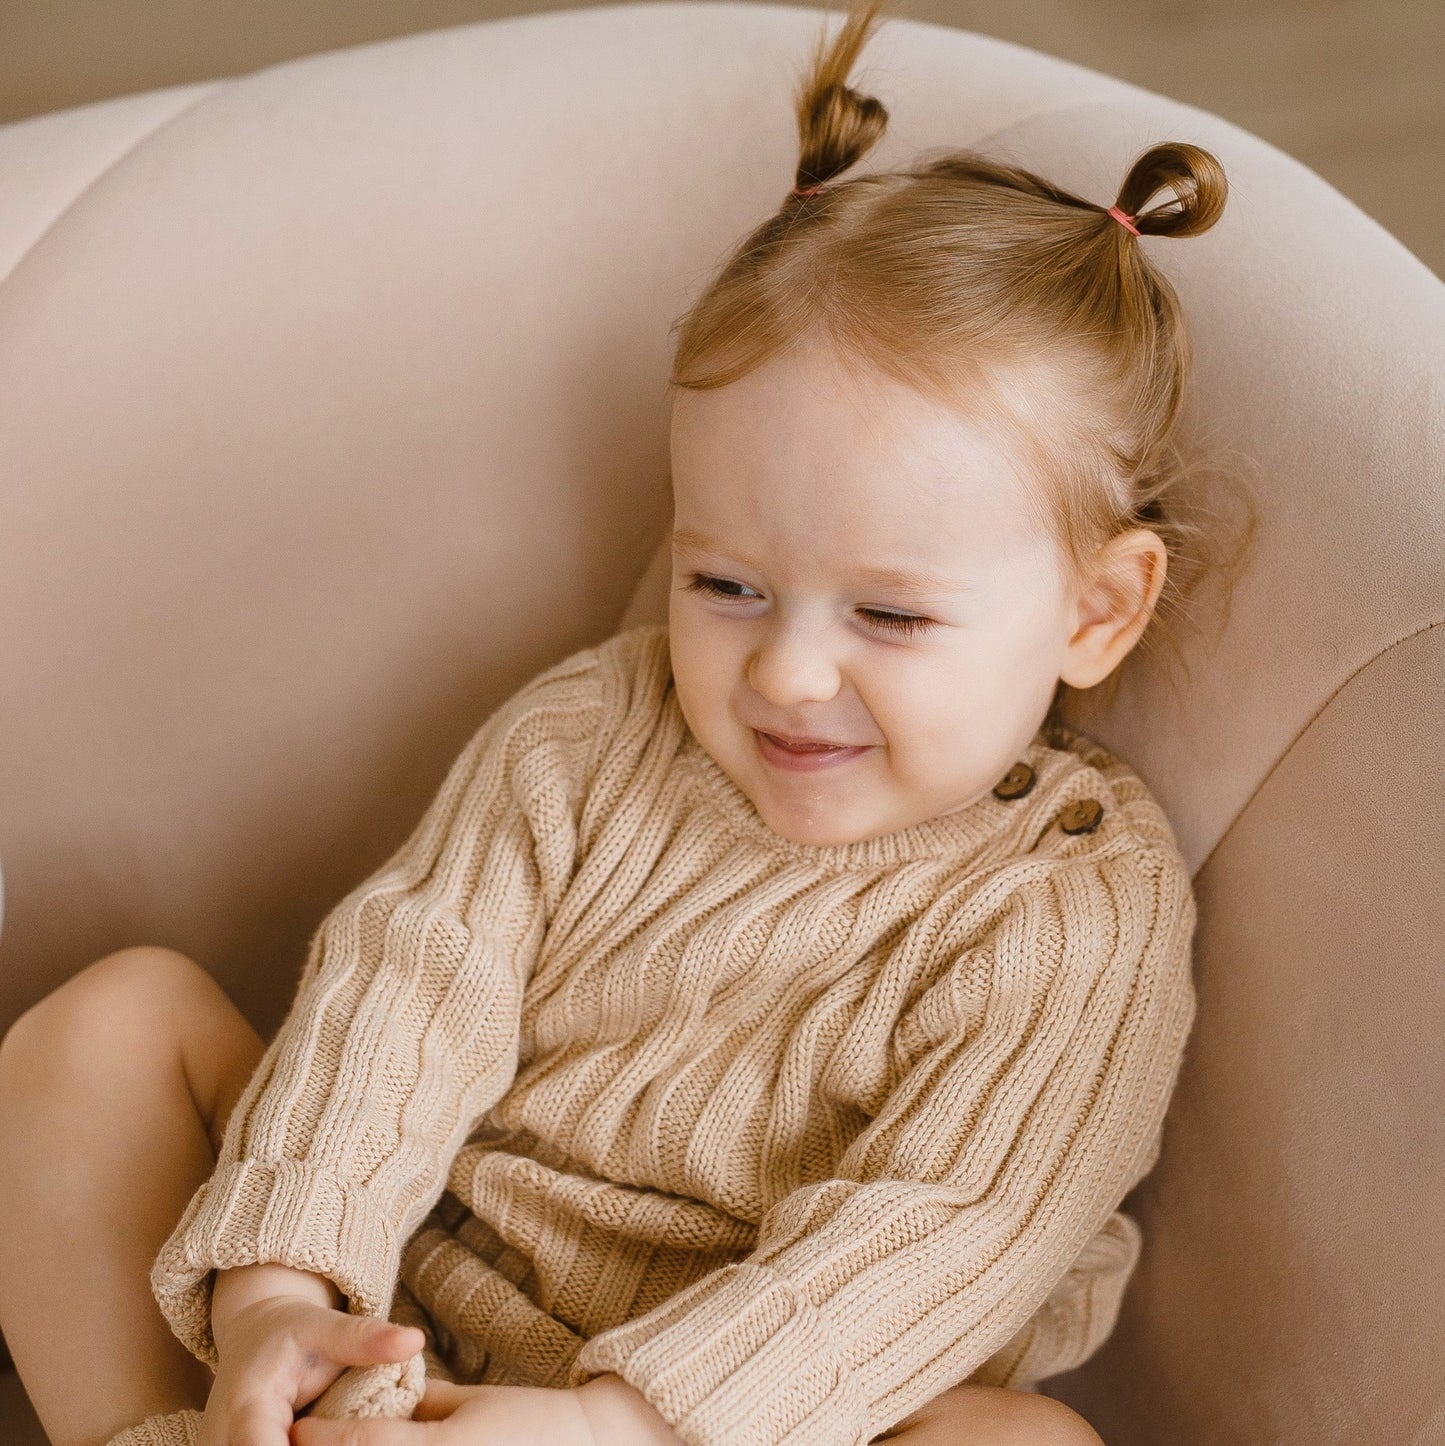 Best Gifts For 6 Month Old: Organic Cableknit Sweater Set